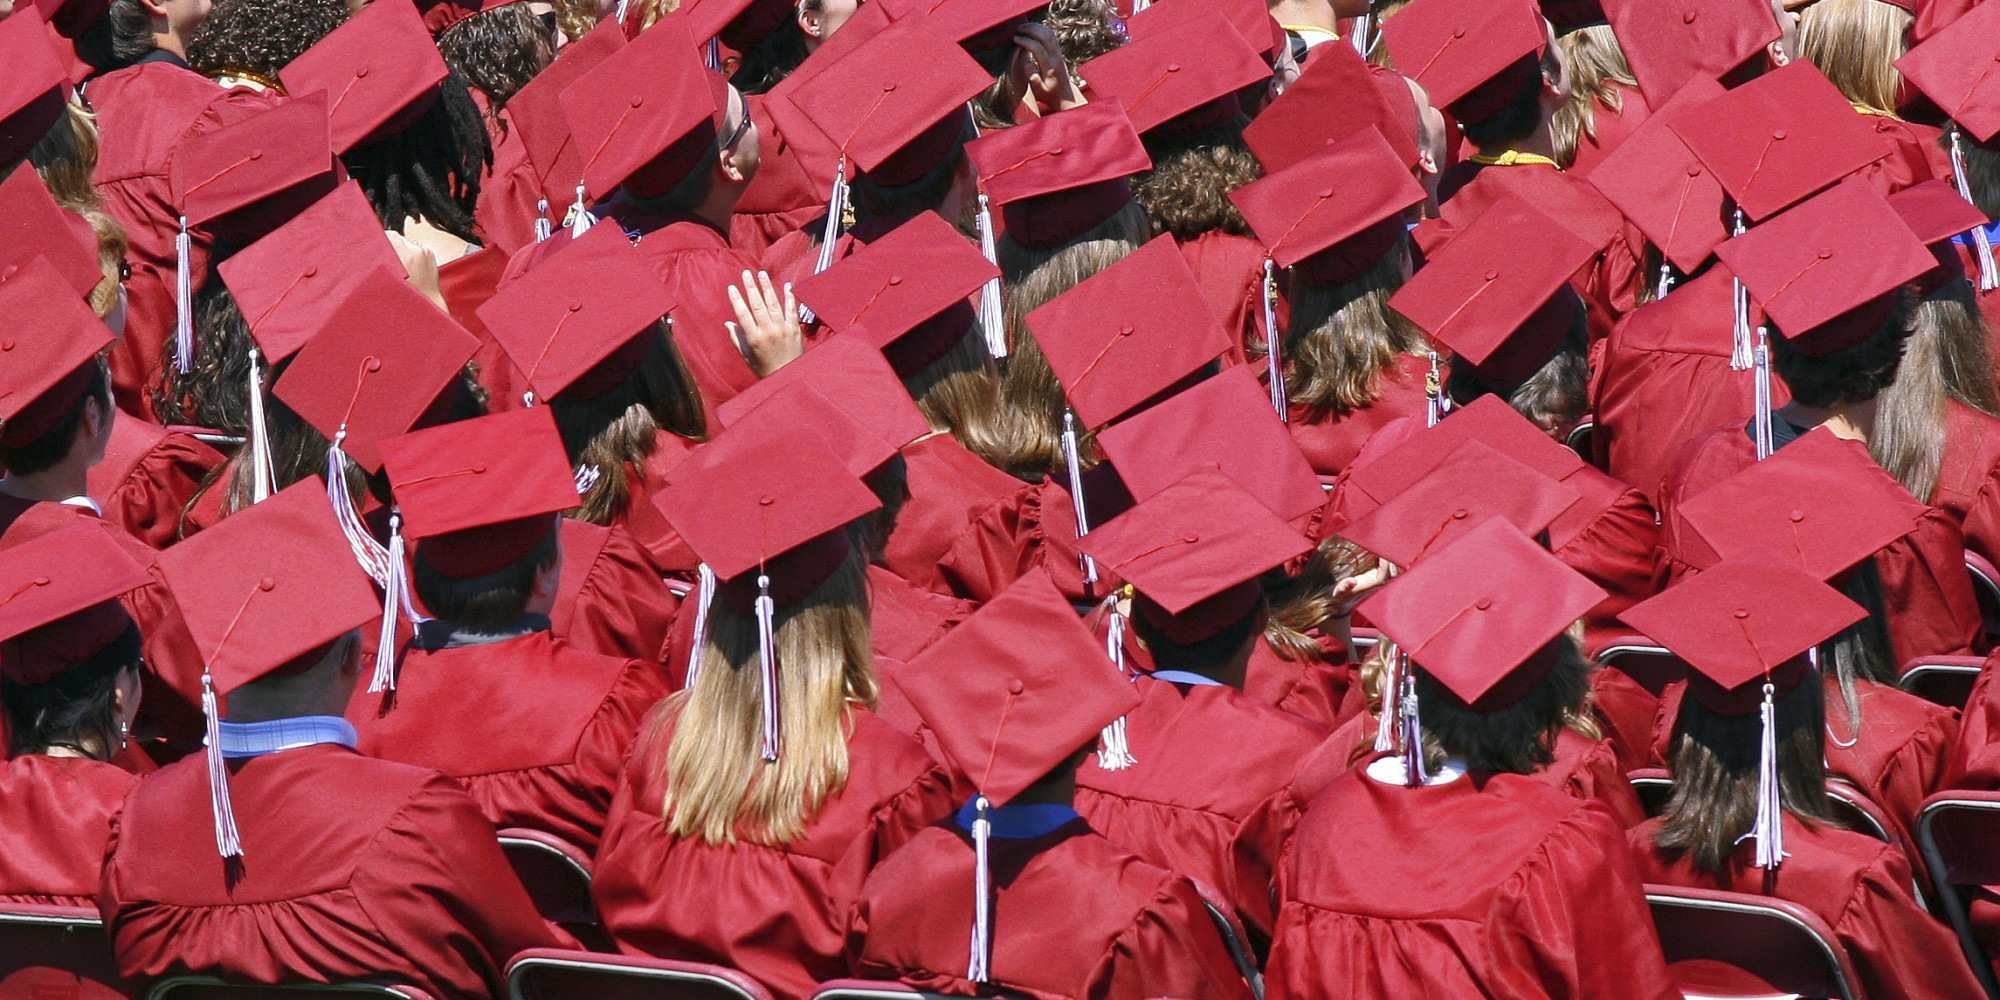 Poverty The Strongest Factor In Whether High School Graduates Go To College | HuffPost